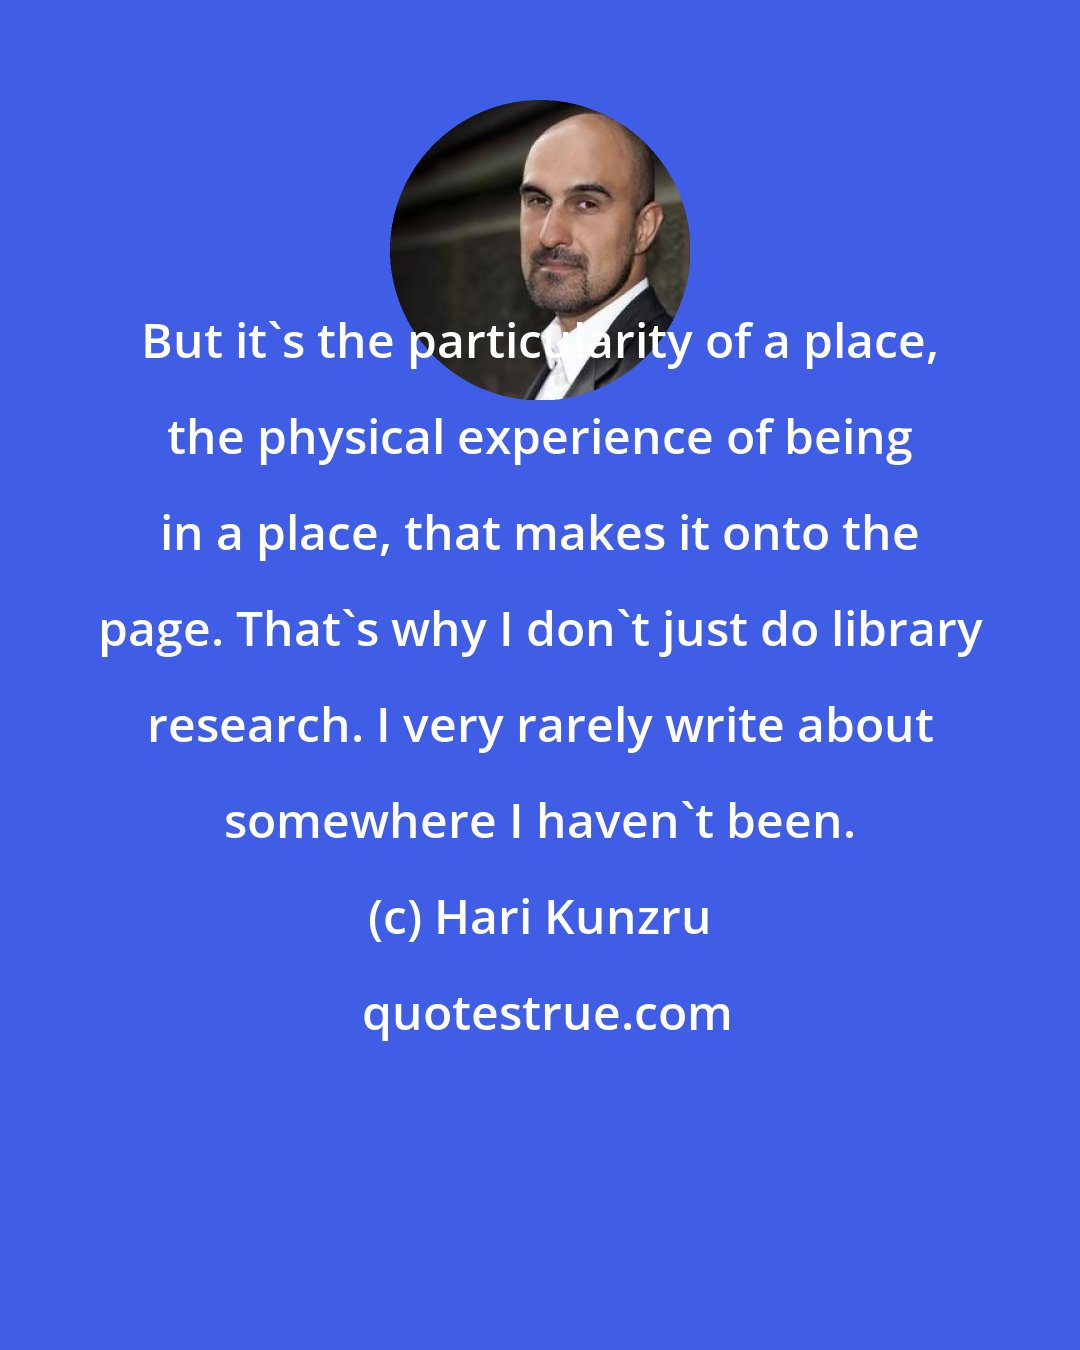 Hari Kunzru: But it's the particularity of a place, the physical experience of being in a place, that makes it onto the page. That's why I don't just do library research. I very rarely write about somewhere I haven't been.